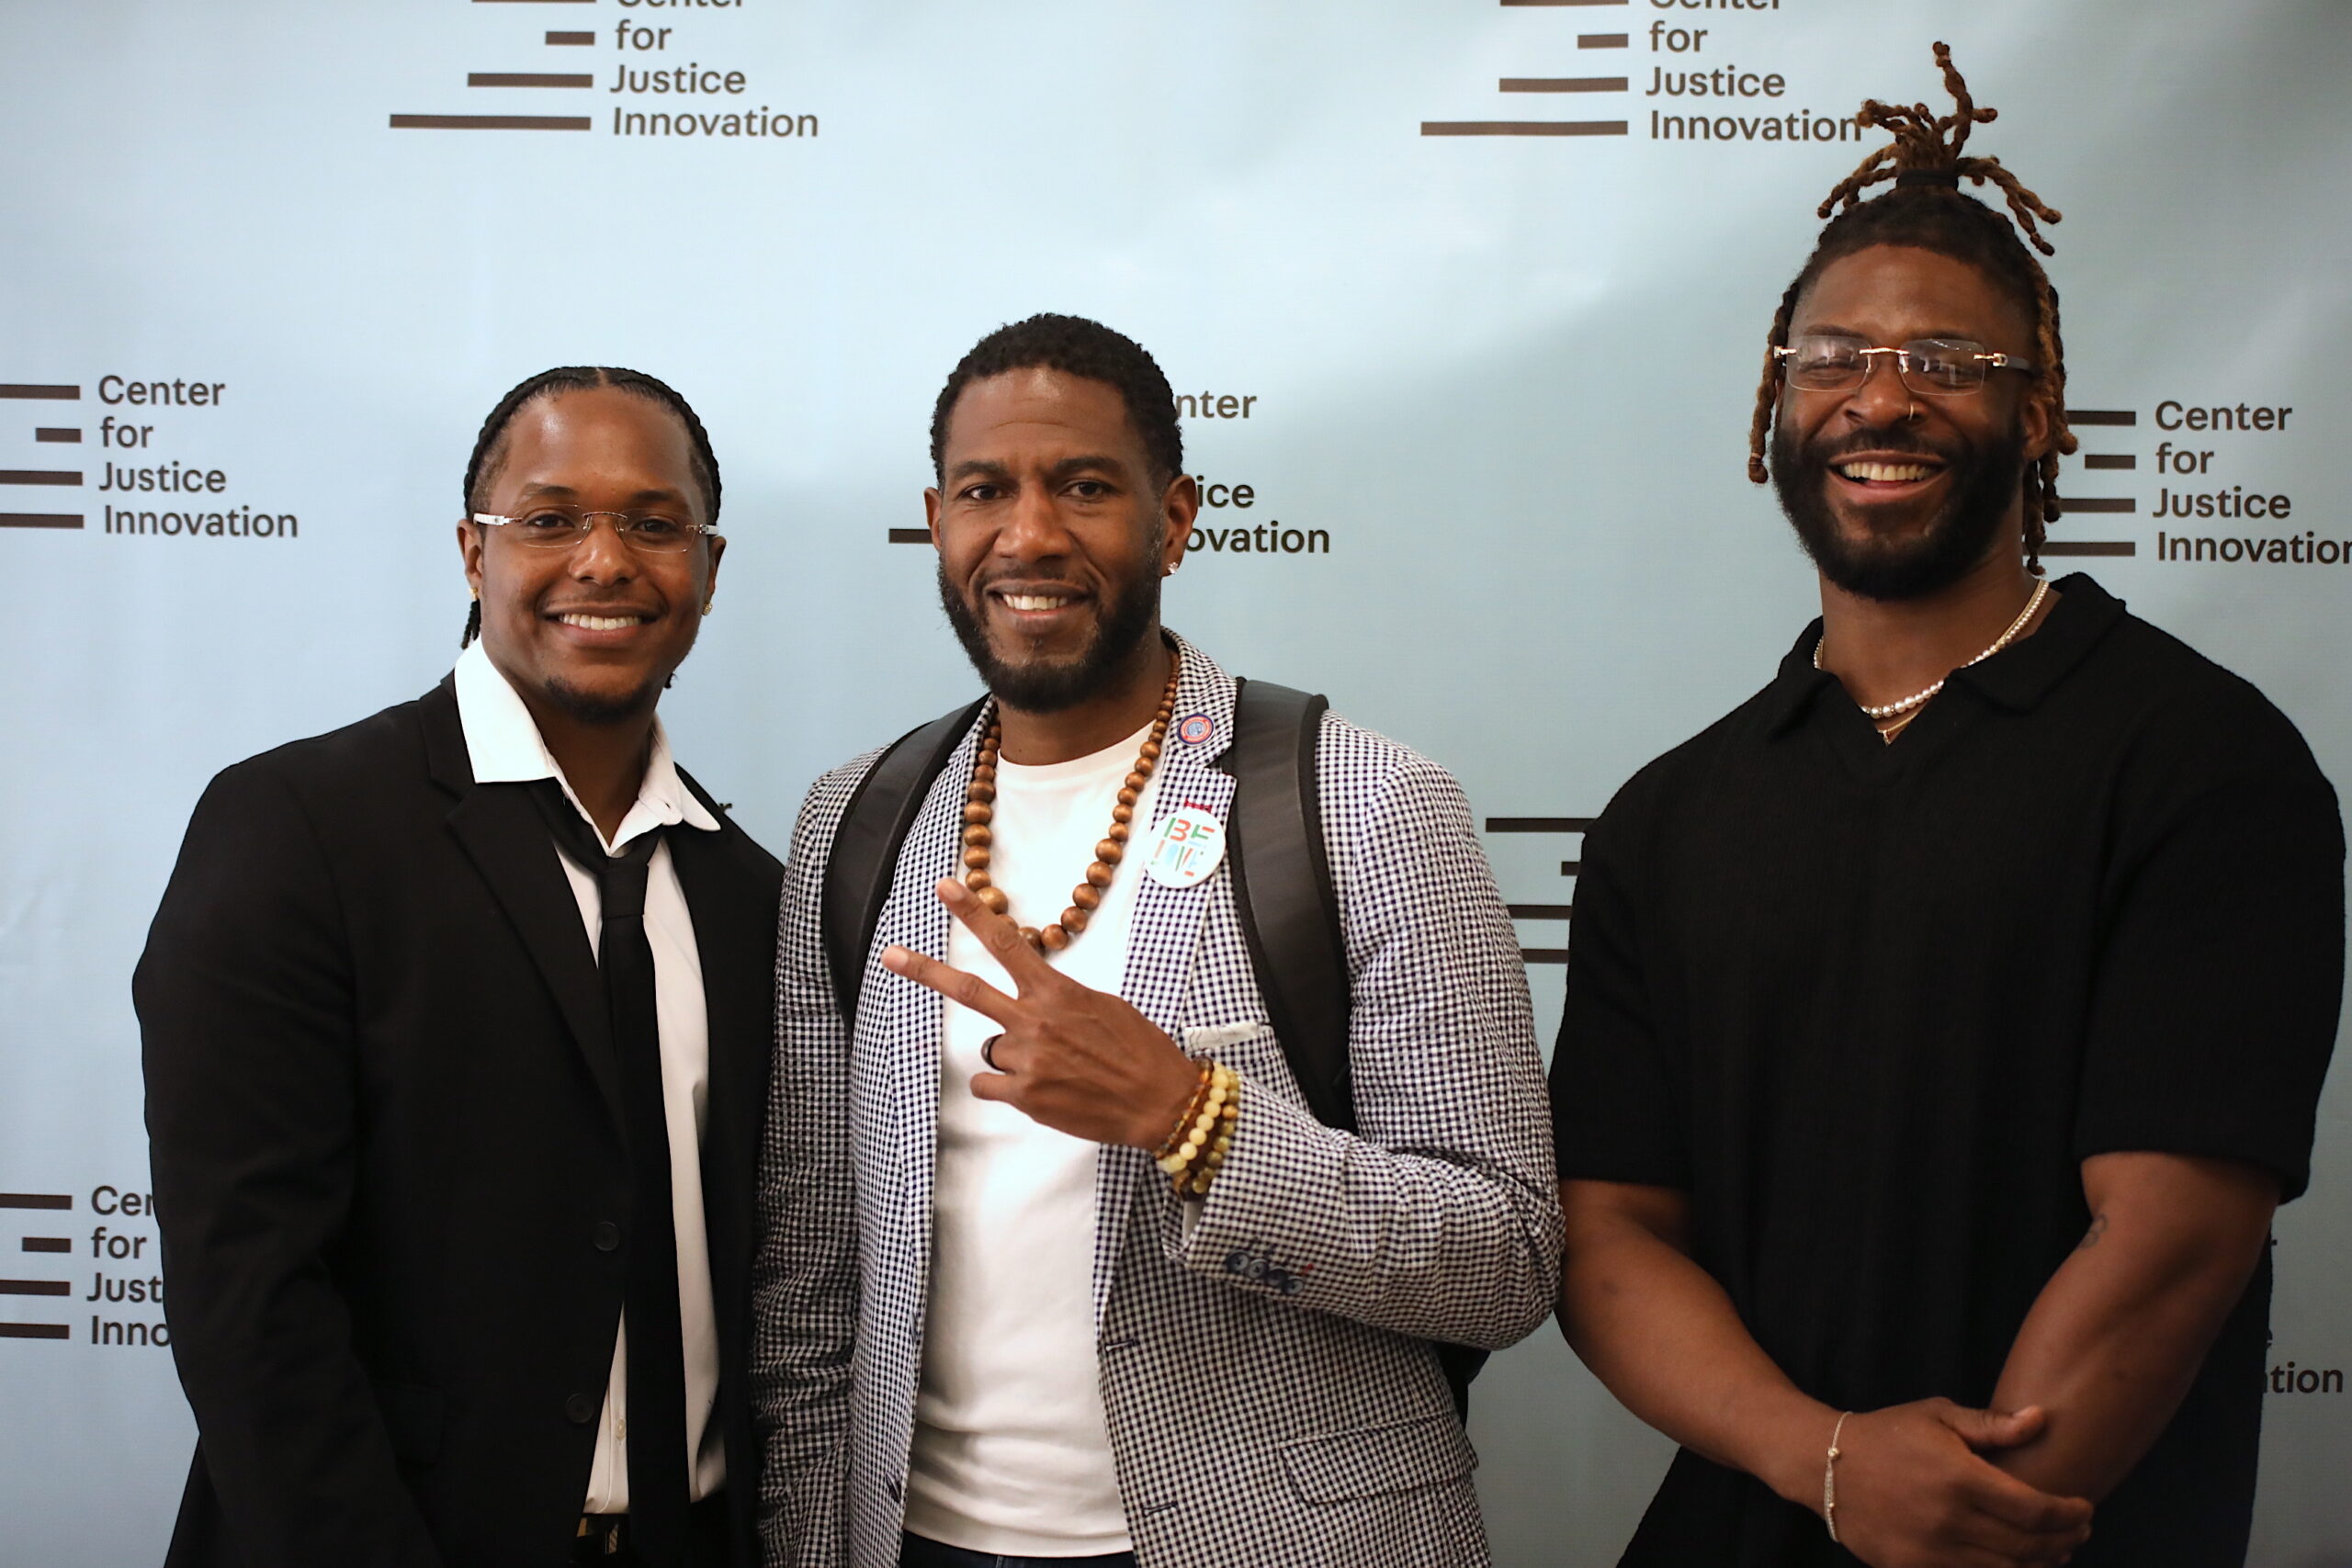 Co-directors Javonte Alexander (right) and Basaime Spate (left) at the launch of the Street Action Network, a new initiative by the Center for Justice Innovation to end gun violence, with Public Advocate Jumaane Williams. Photo by William Harkins/Center for Justice Innovation